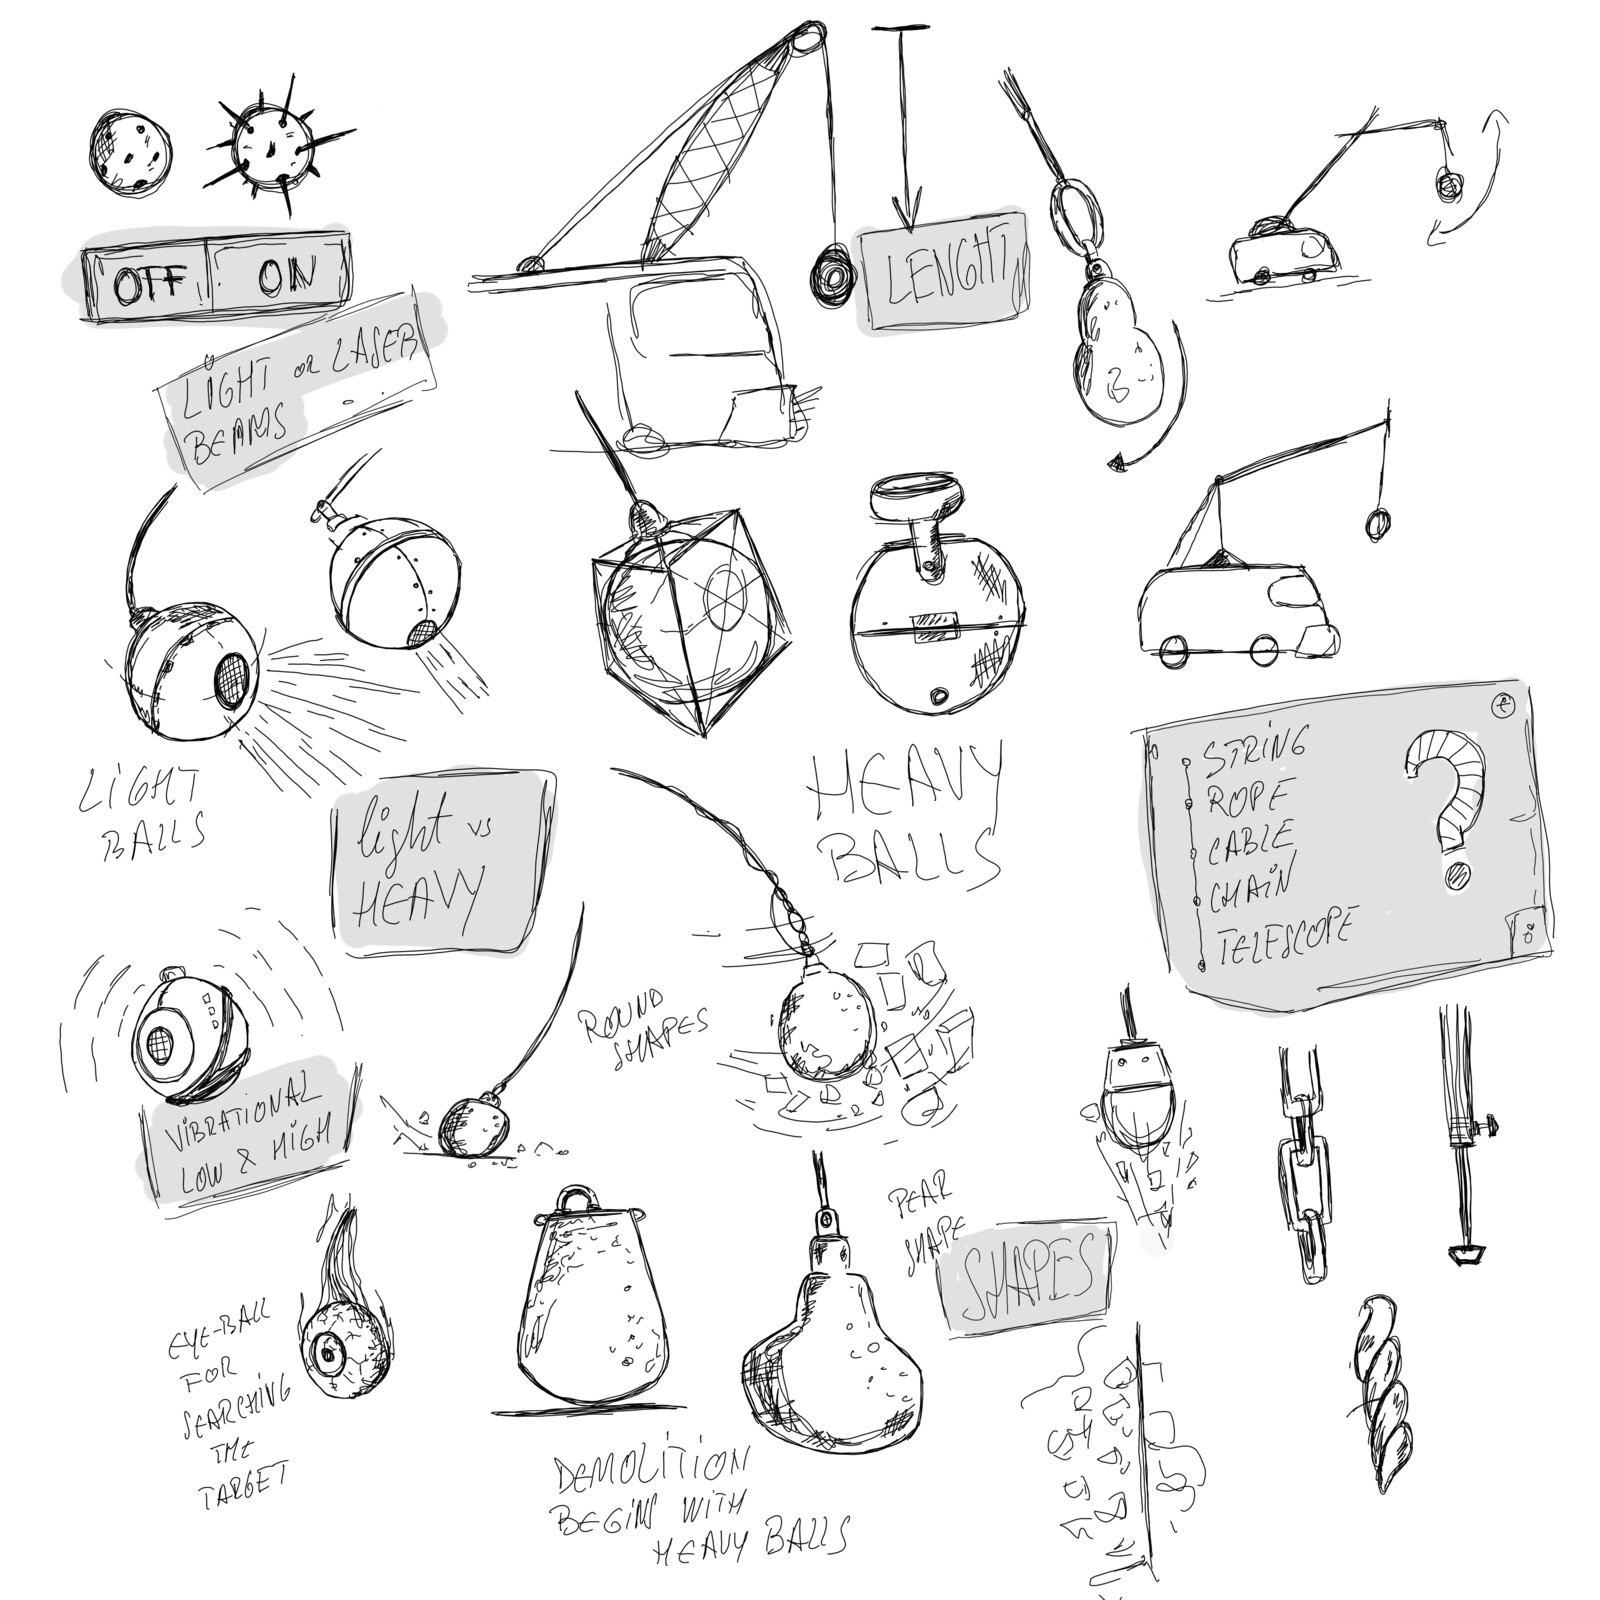 Early Concept - Wrecking ball, exploration